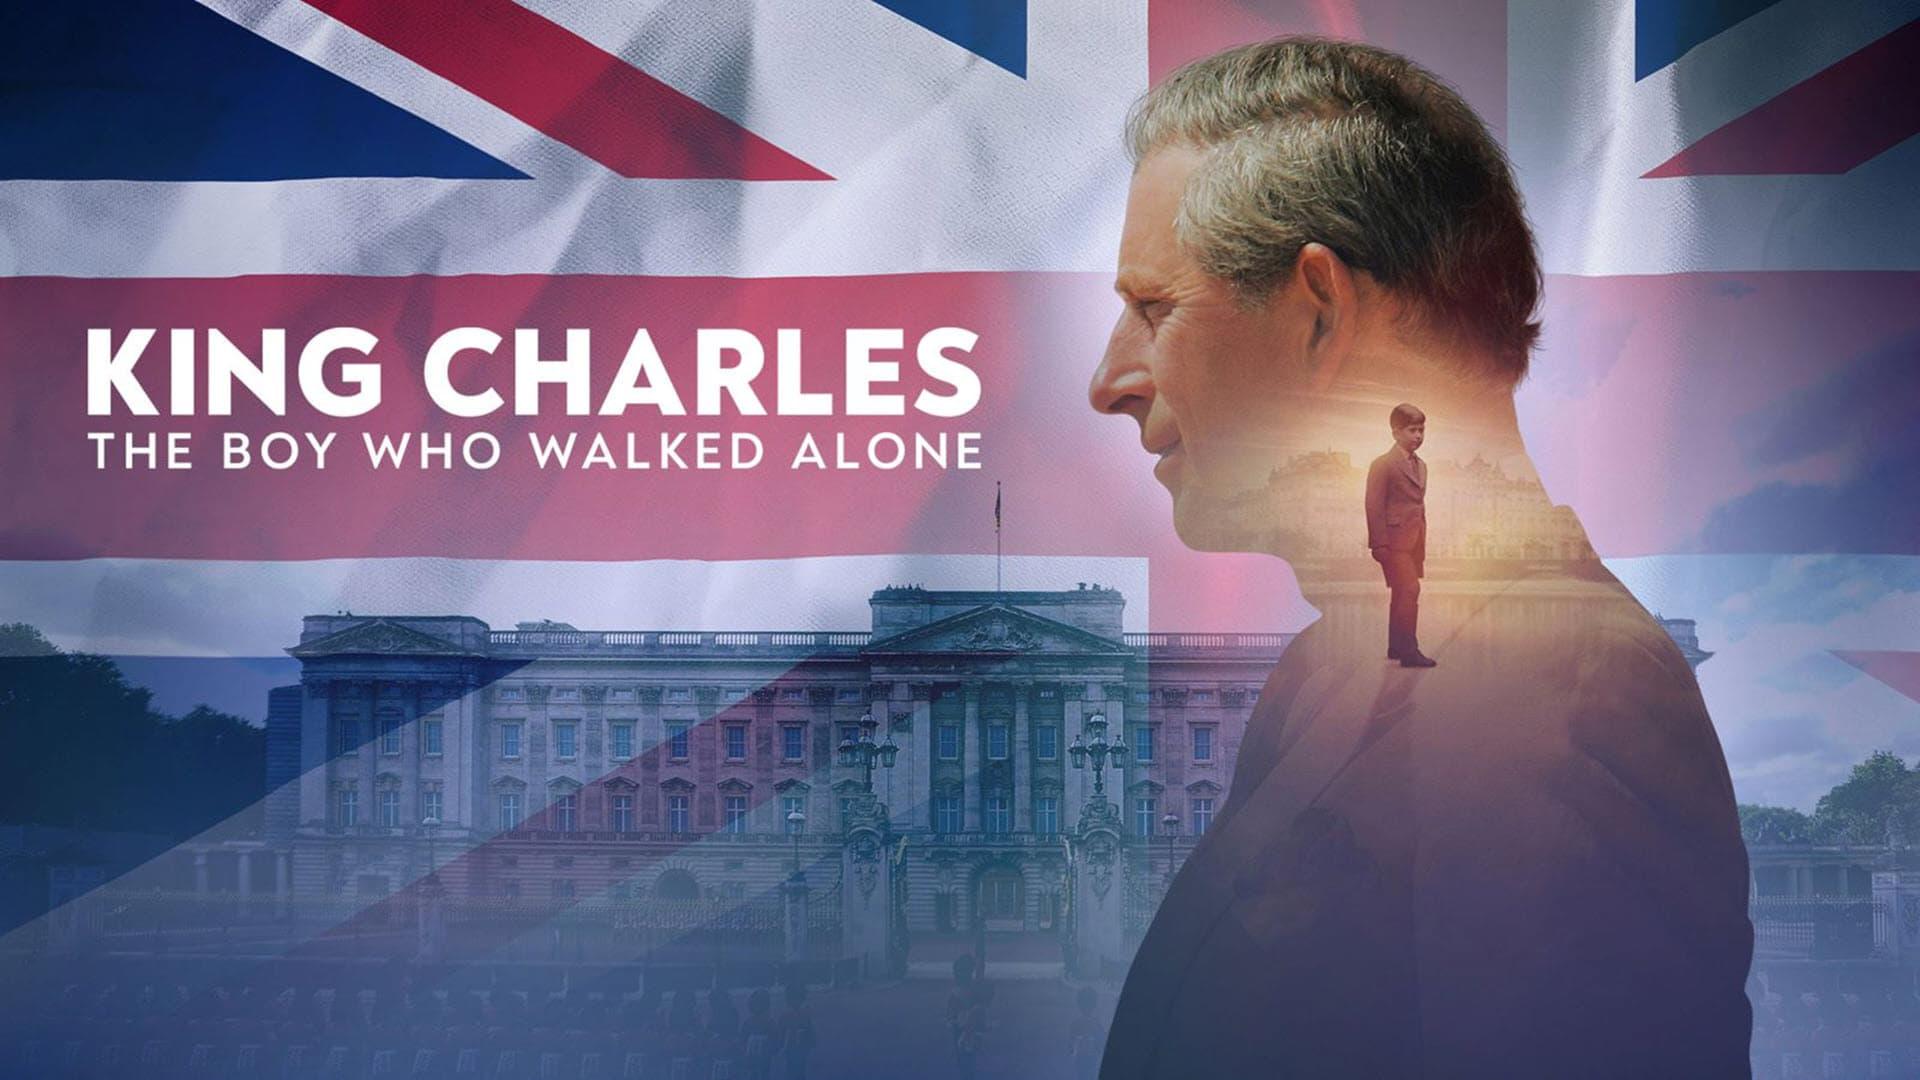 King Charles: The Boy Who Walked Alone backdrop